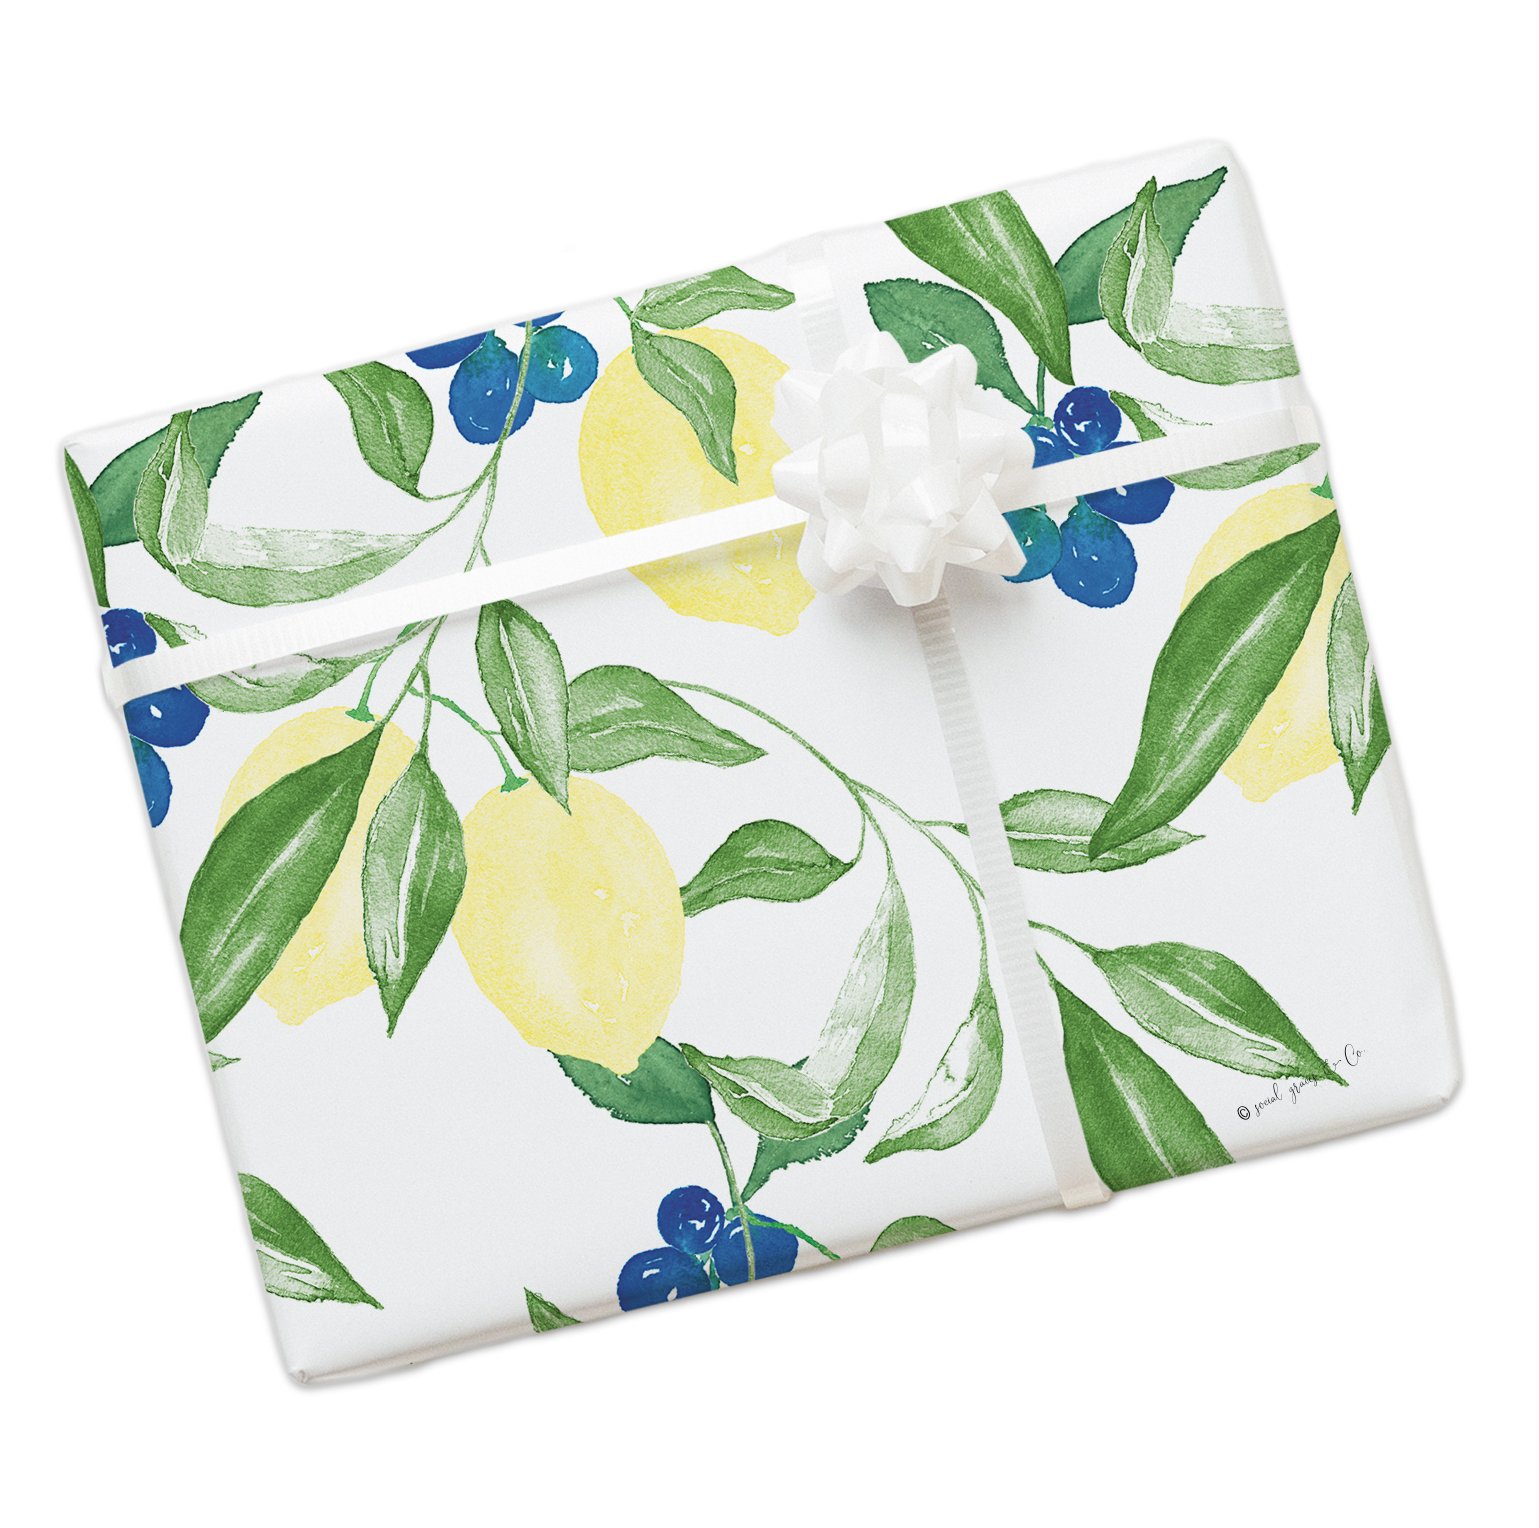 Lemon_Blueberry_Wrapping_Paper